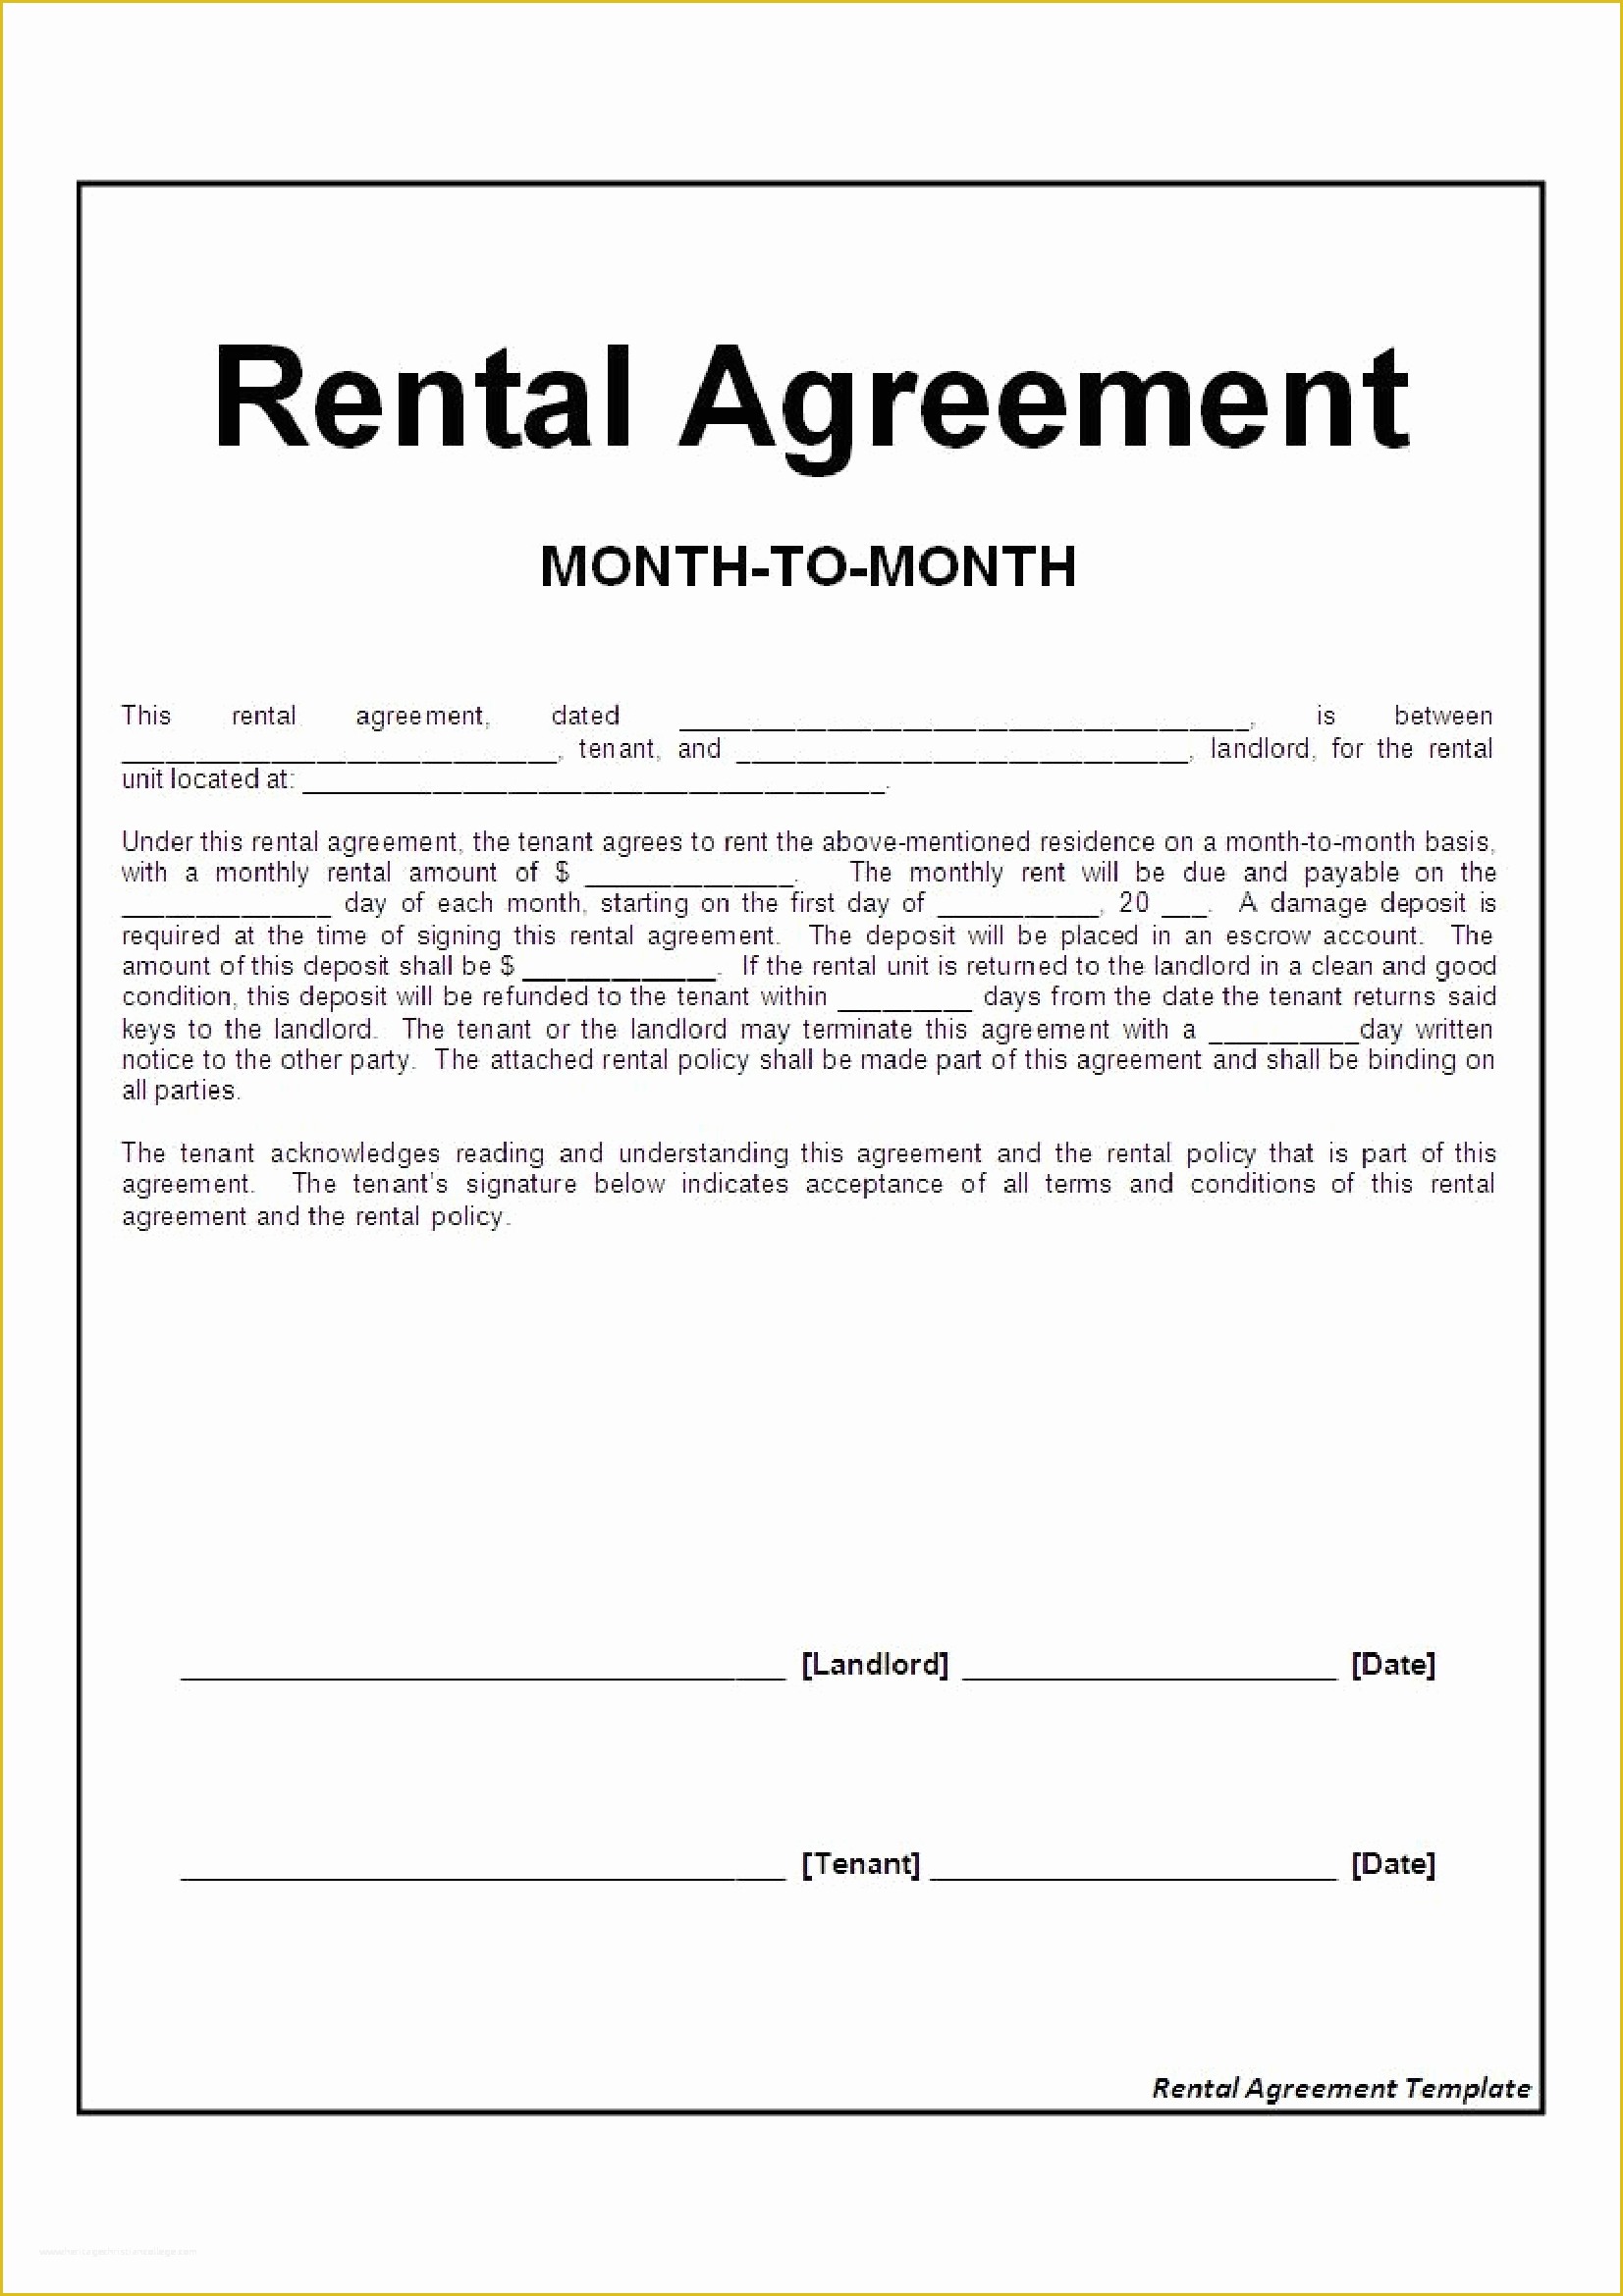 Free Month to Month Rental Agreement Template Of Letter formats Download Free Business Letter Templates